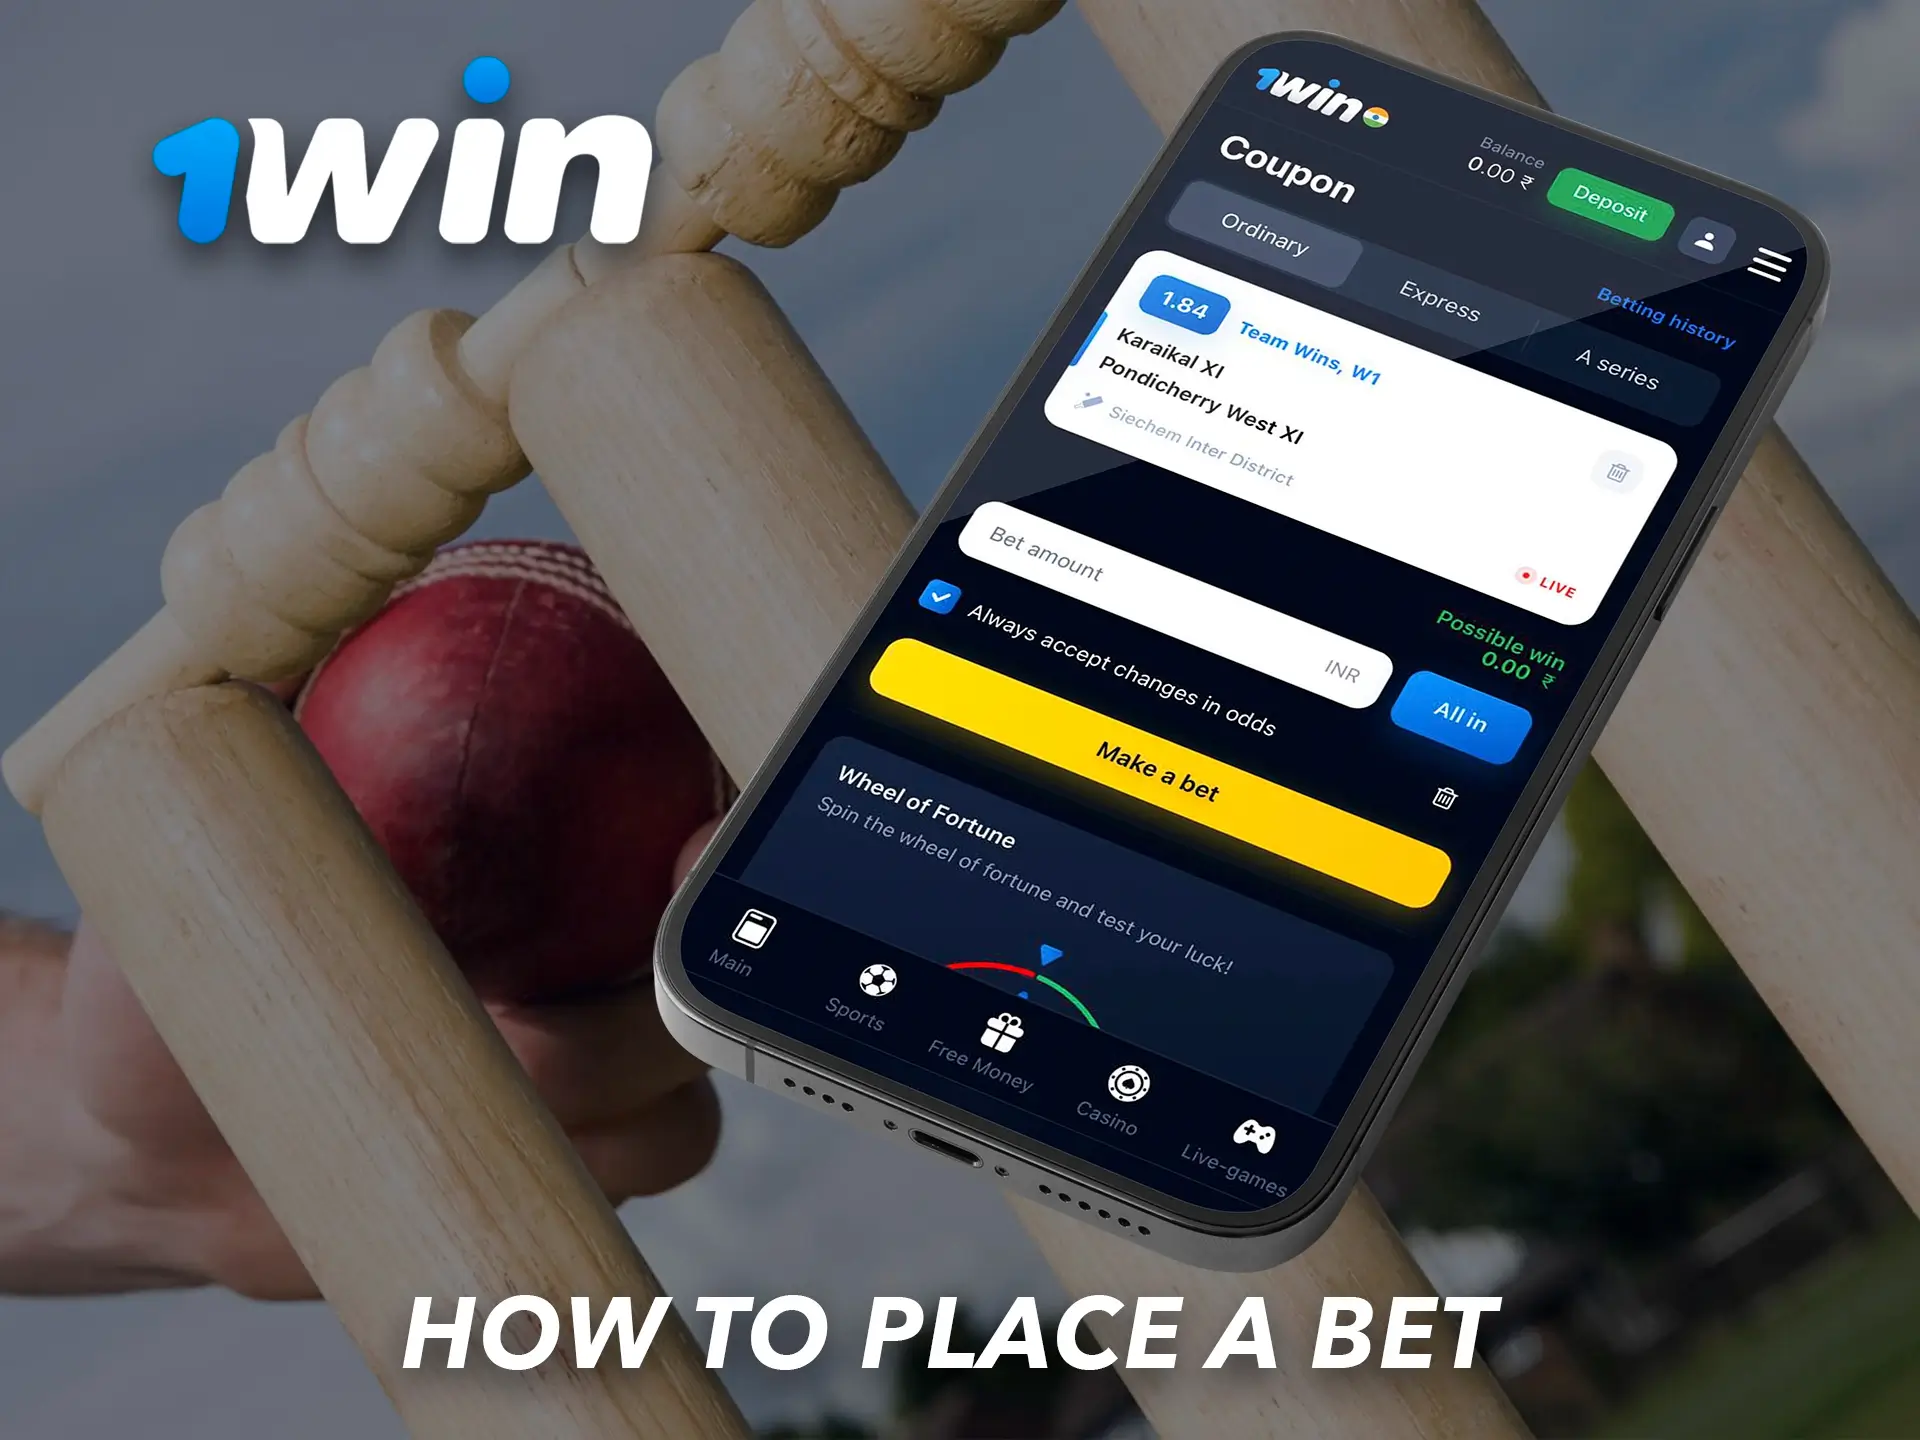 Choose a cricket match that suits you and place your first bet at 1Win Casino.